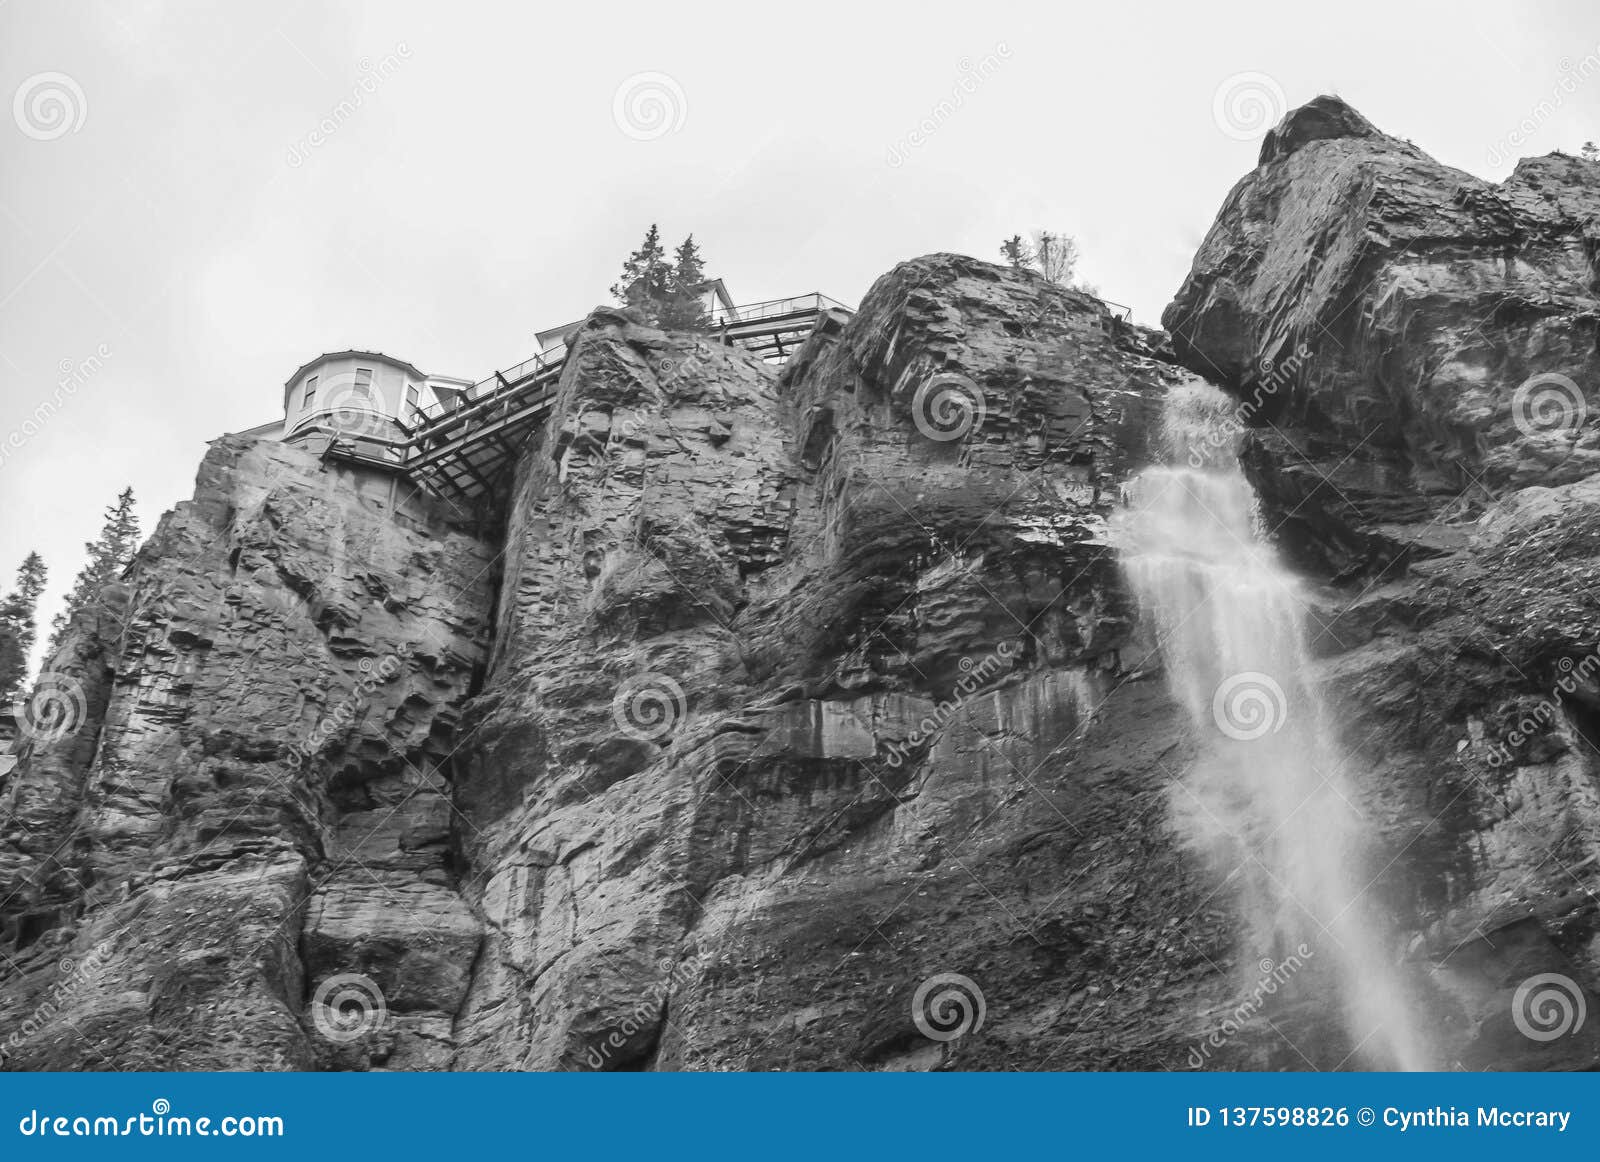 Bridal Veil Falls In Telluride Colorado Stock Photo Image Of Tallest Waterfall